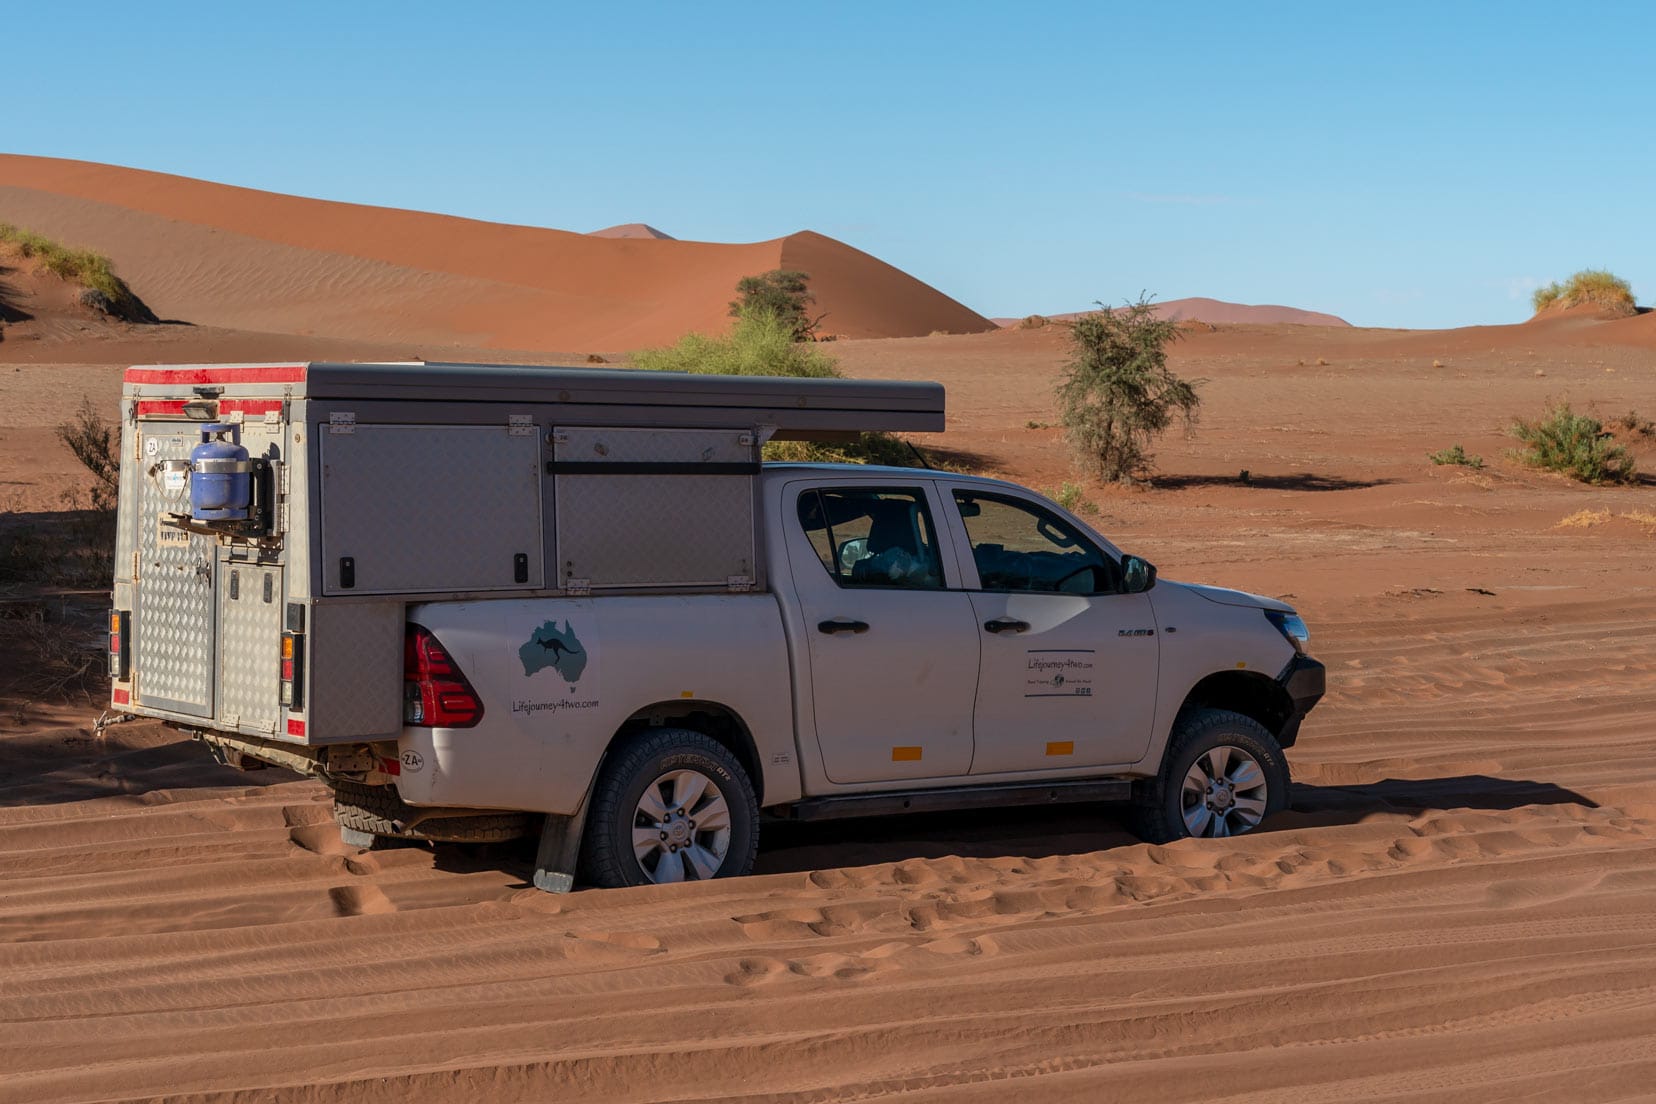 4x4 parked in soft desert red sand